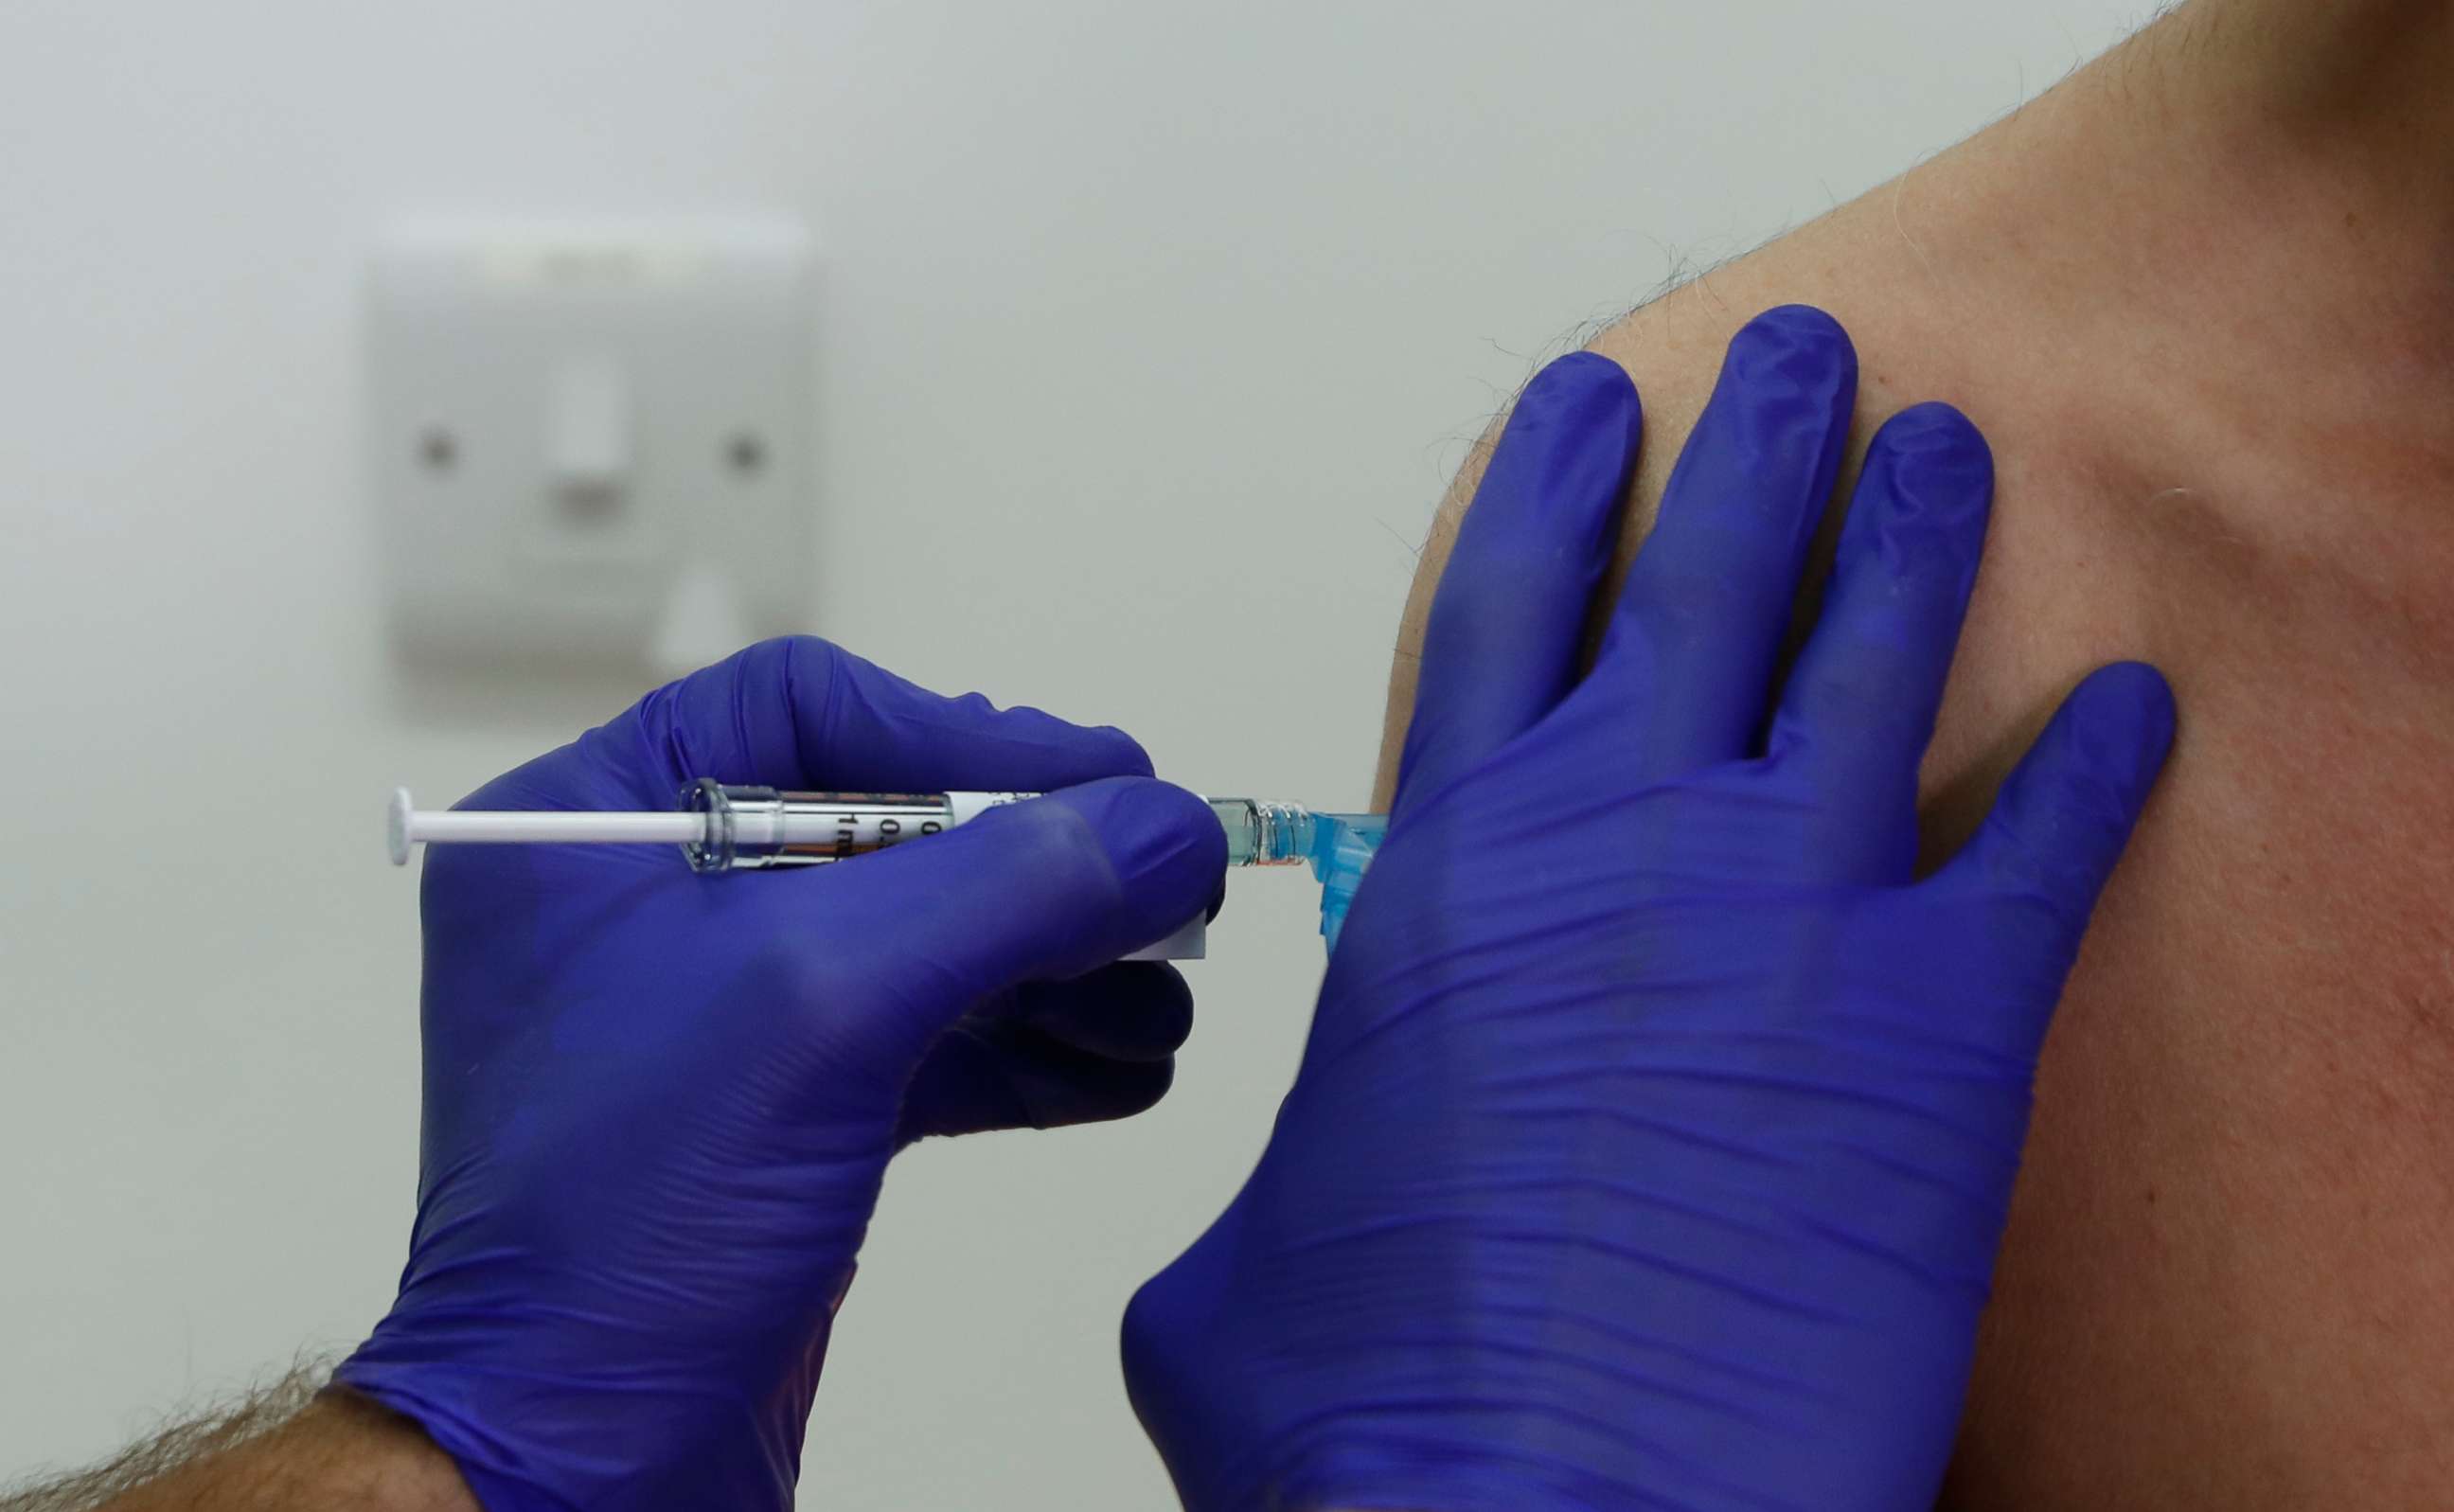 PHOTO: A volunteer is given an injection at St George's University hospital in London on Oct. 7, 2020. Novavax Inc. said its COVID-19 vaccine appears 89% effective based on a study and that it seems to work against new mutated strains of the virus.